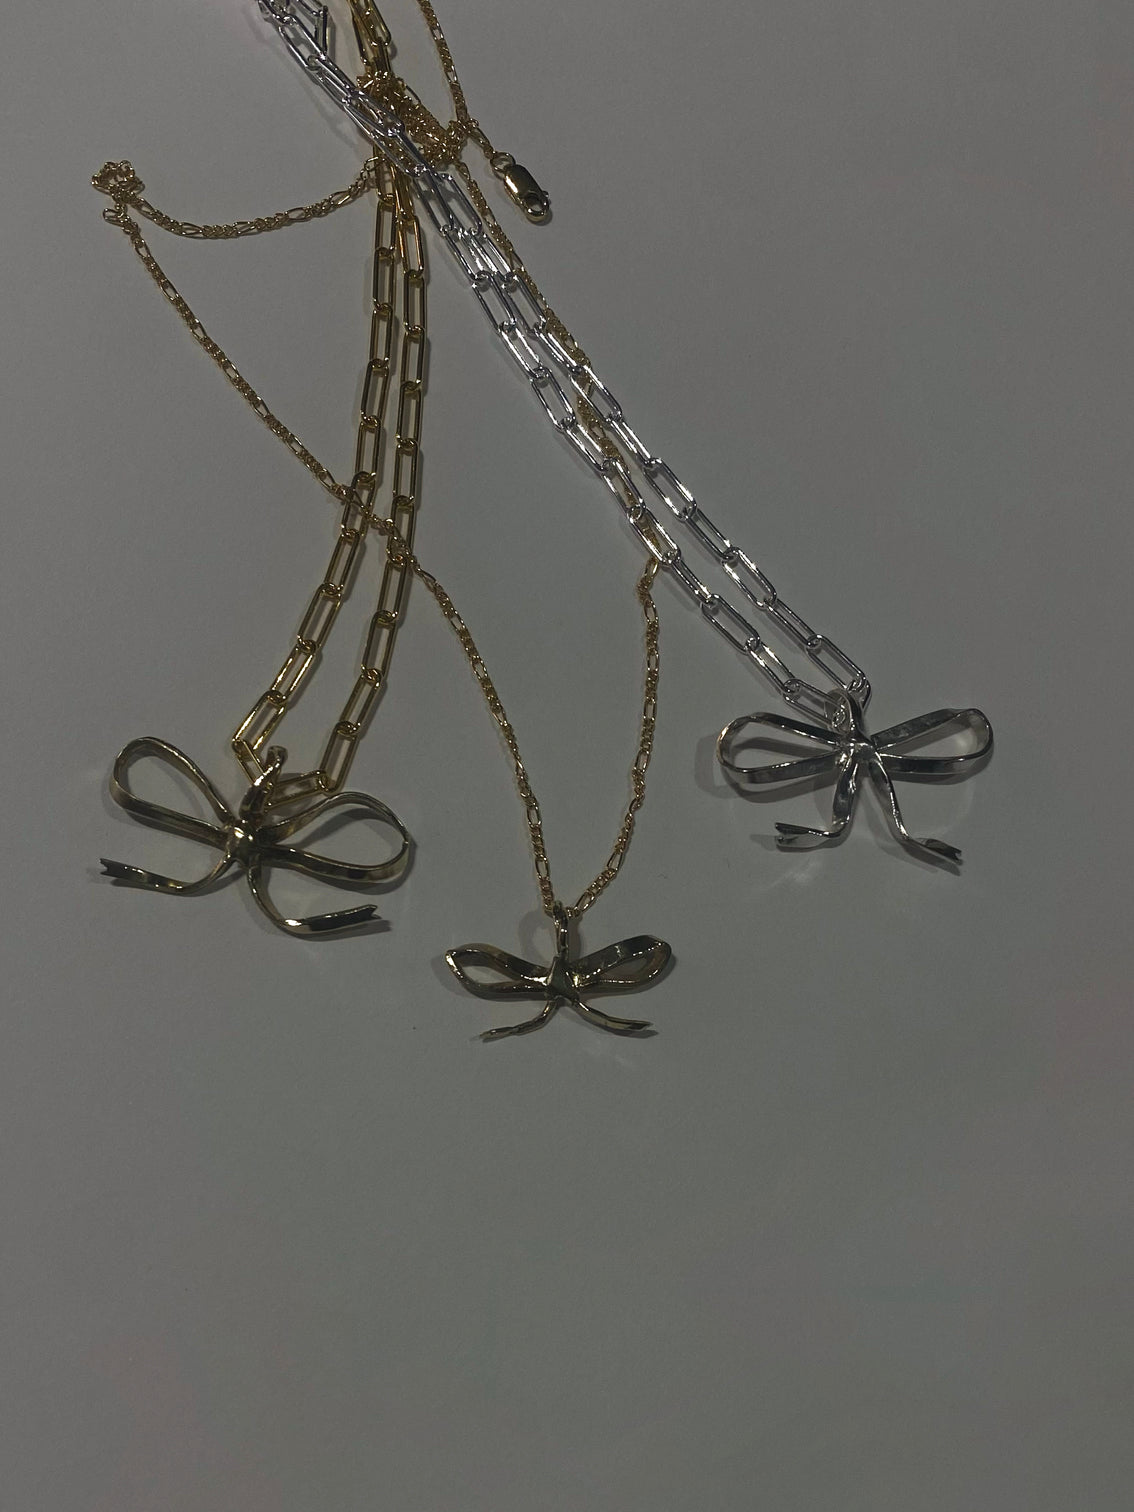 3 bow necklaces on grey backdrop with tangled chains